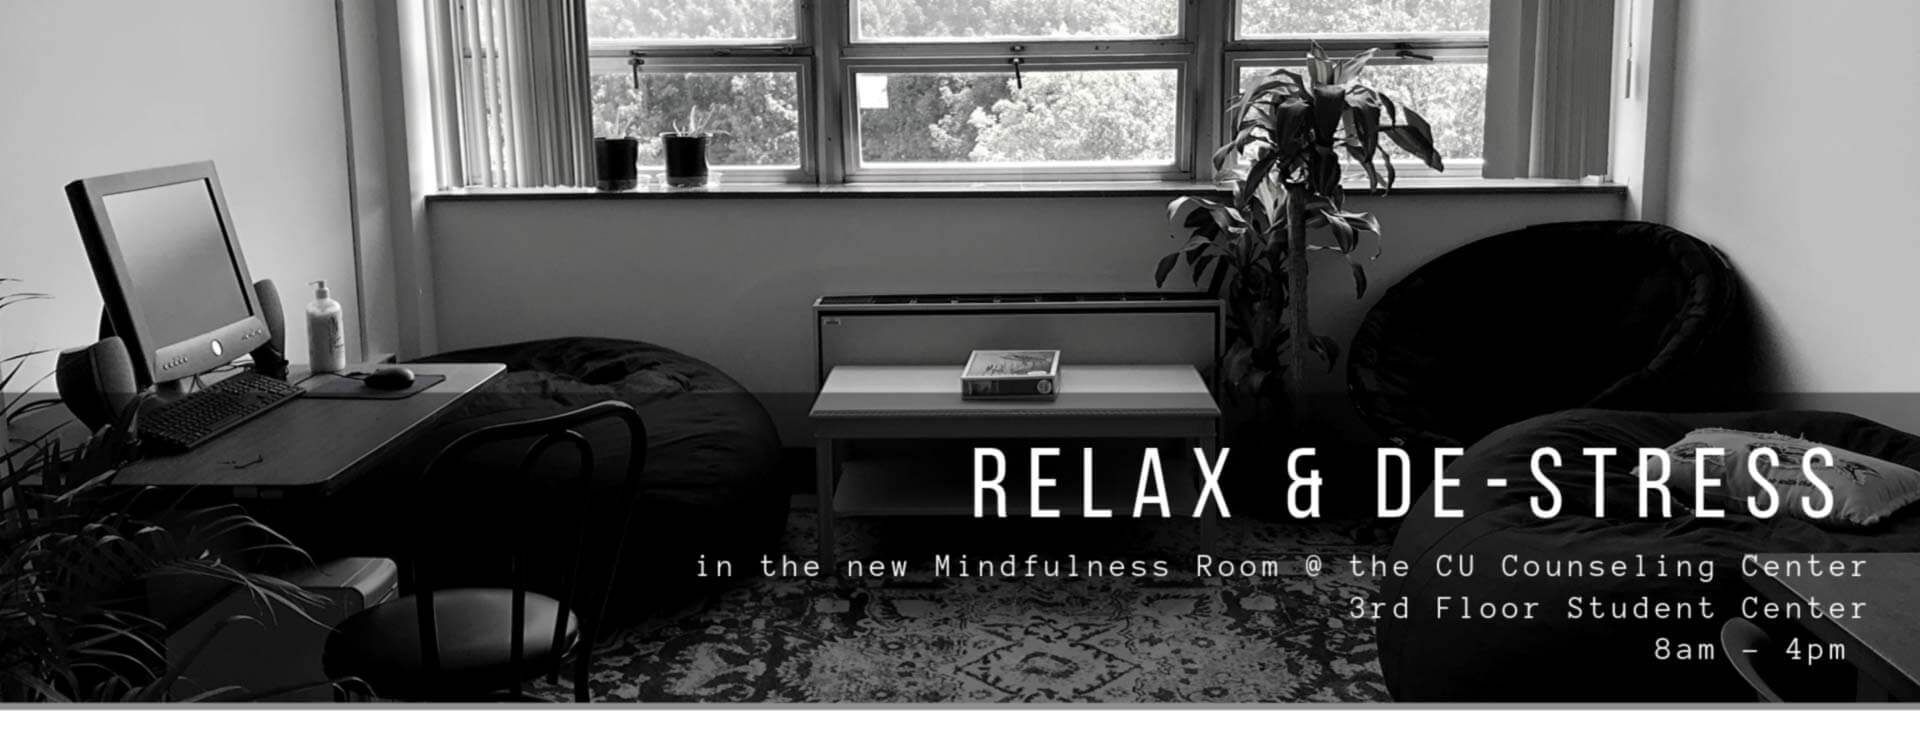 Relax and De-stress in the new mindfulness room at the CU Counseling Center. Located on the 3rd floor of the Jean and Jerry Beasley student center. Open 8am to 4pm. Click here to learn more about our counseling center